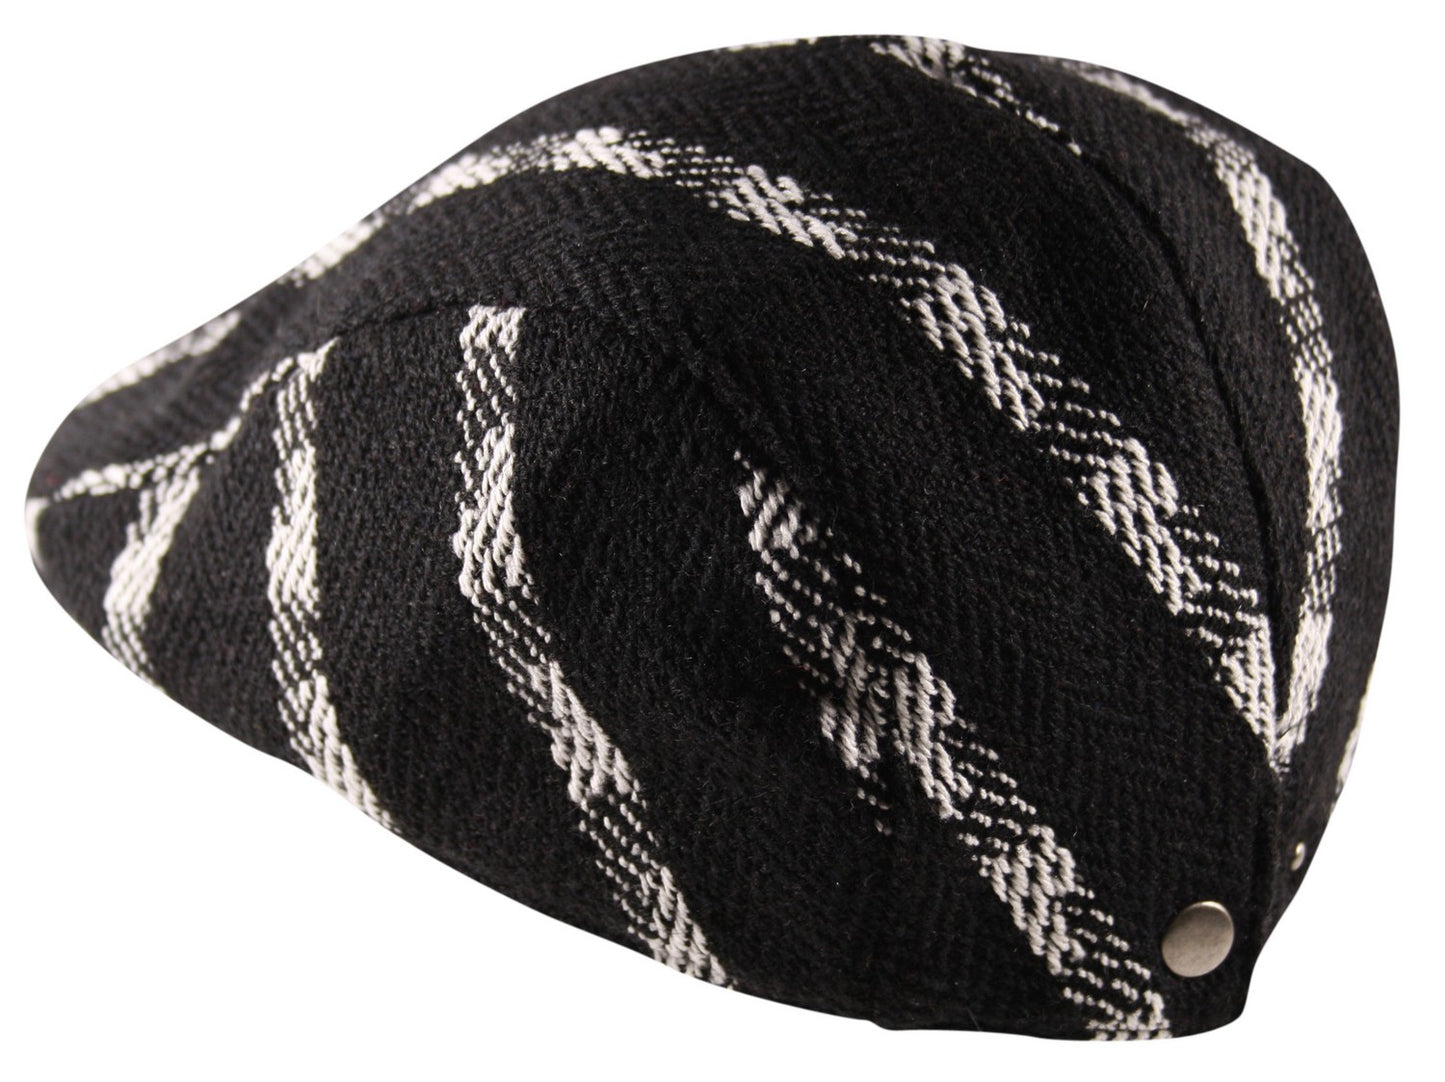 Patch Lines Flat Cap in Black White